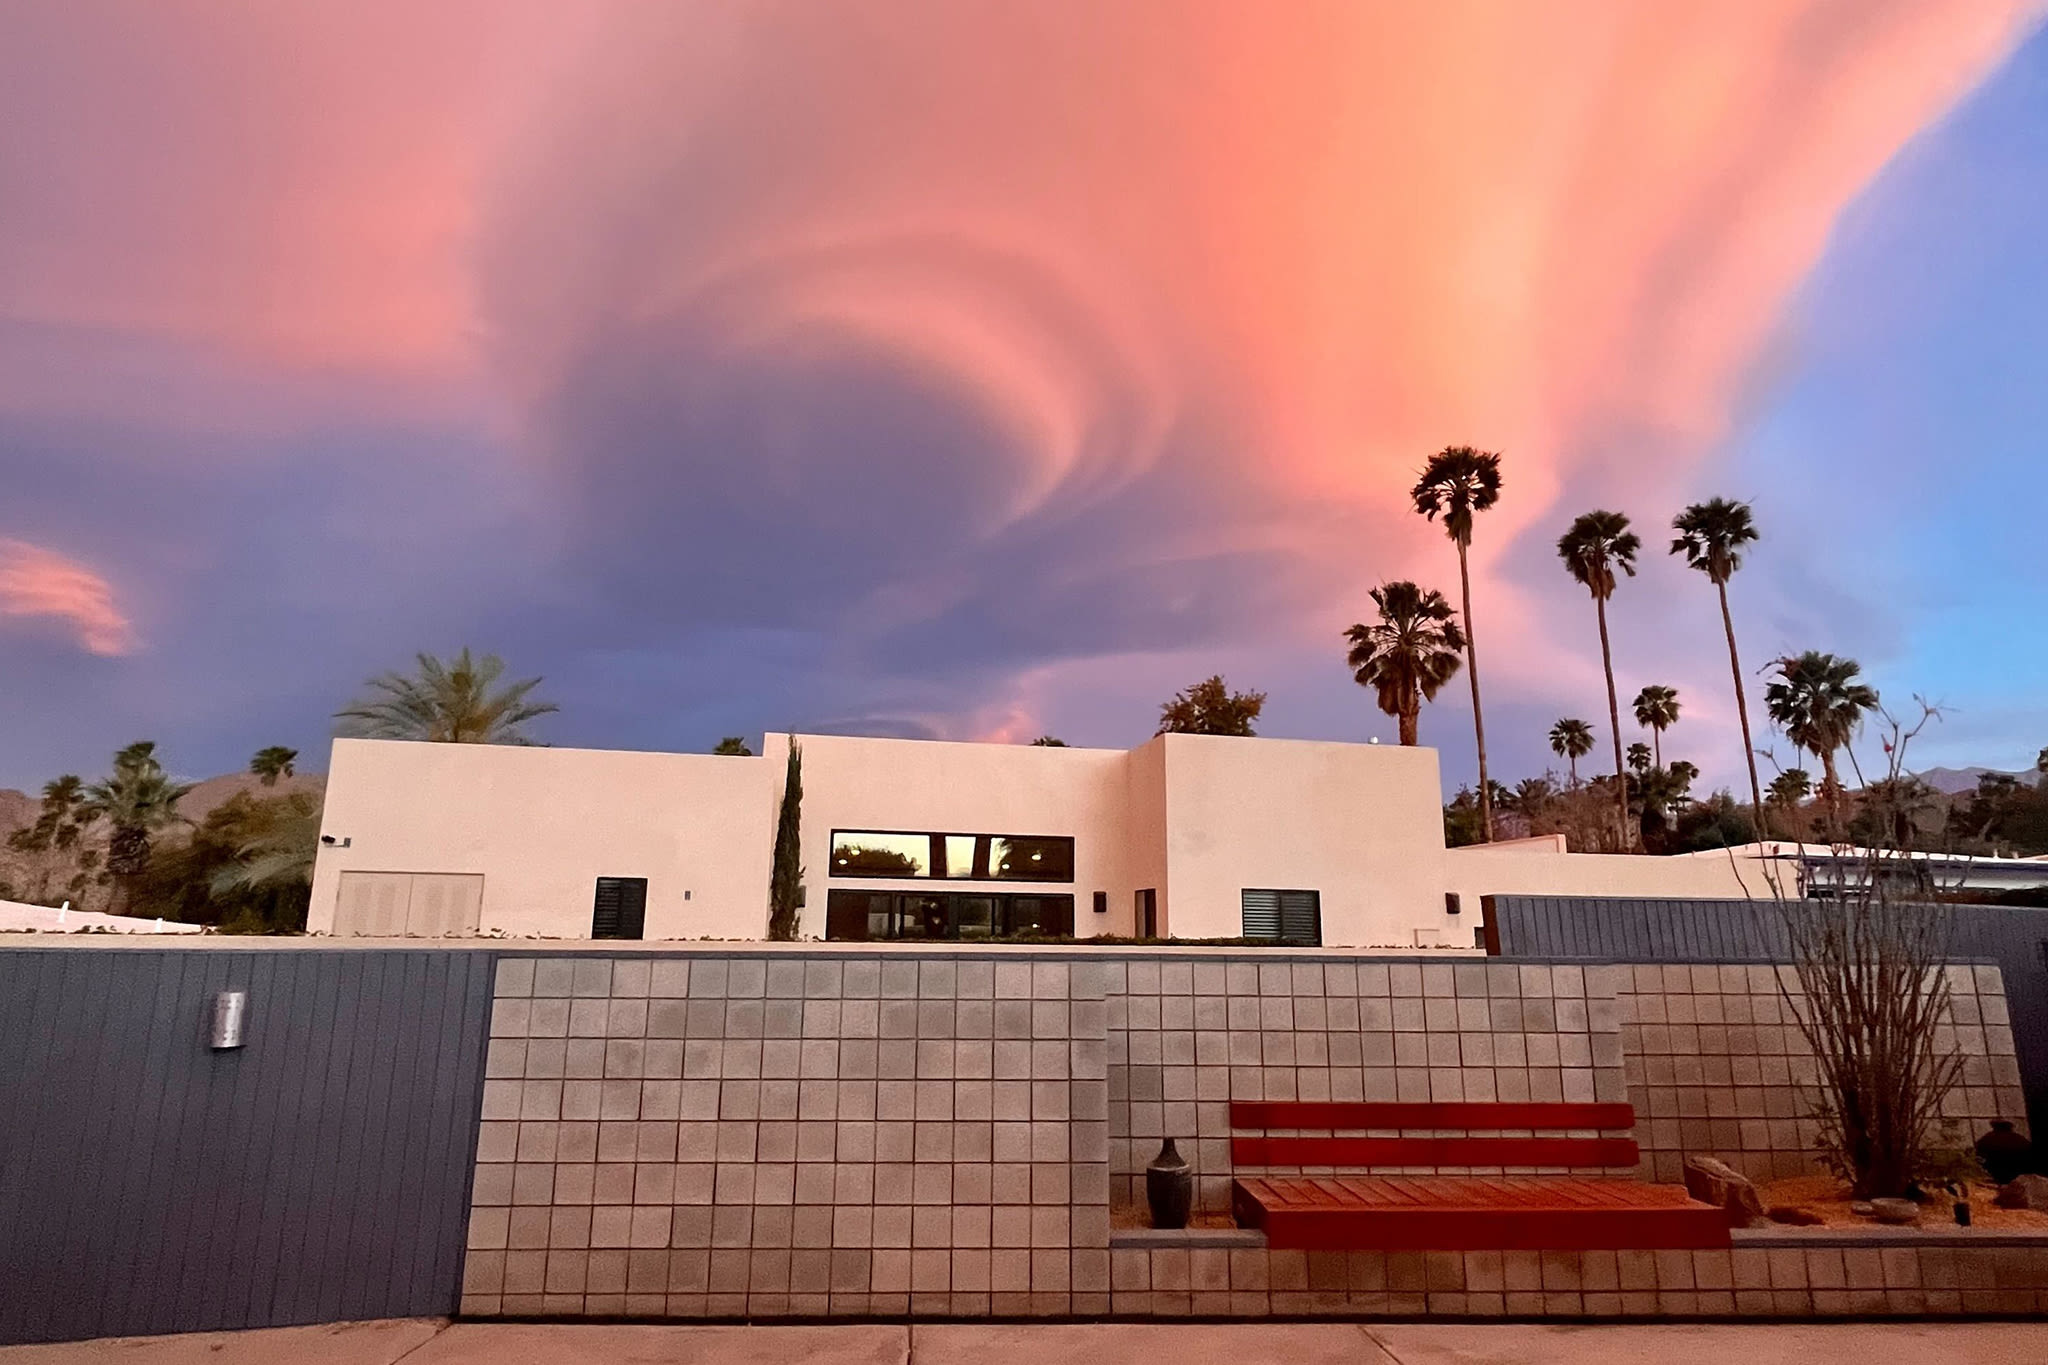 Rare, stunning formation appears over California town